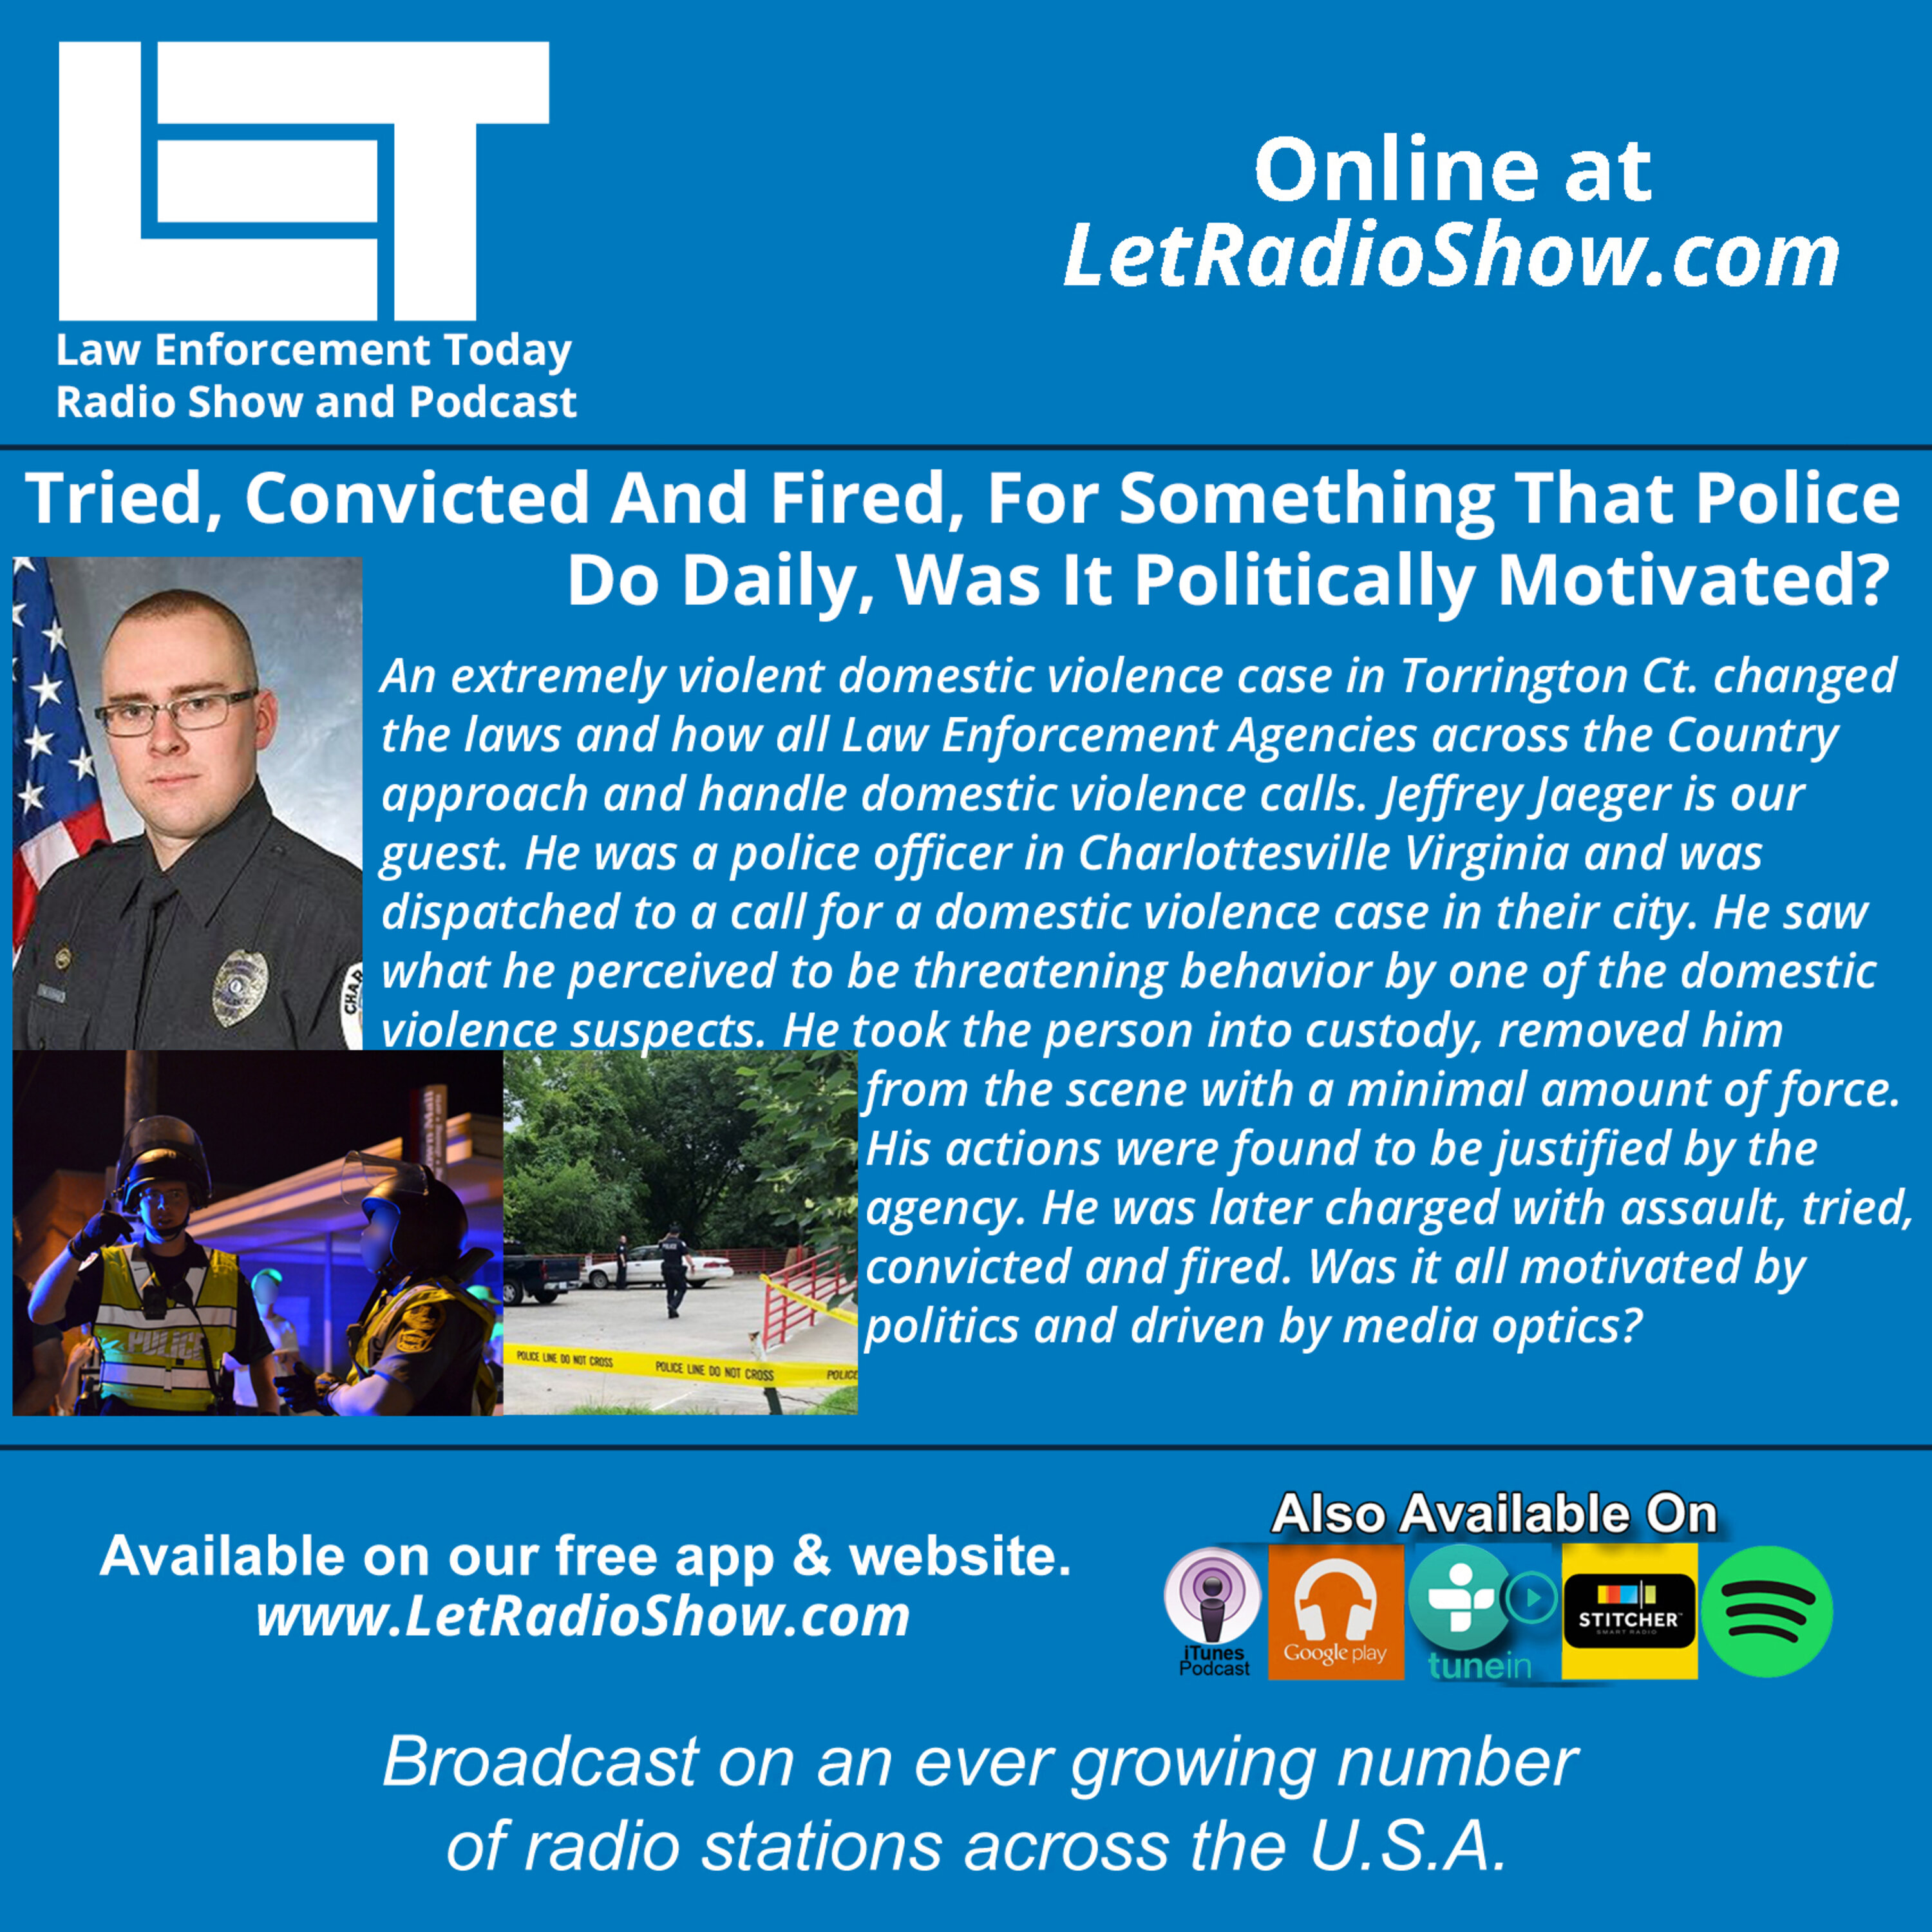 S5E22: Tried, Convicted And Fired, For Something That Police Do Daily. Was It Politically Motivated?